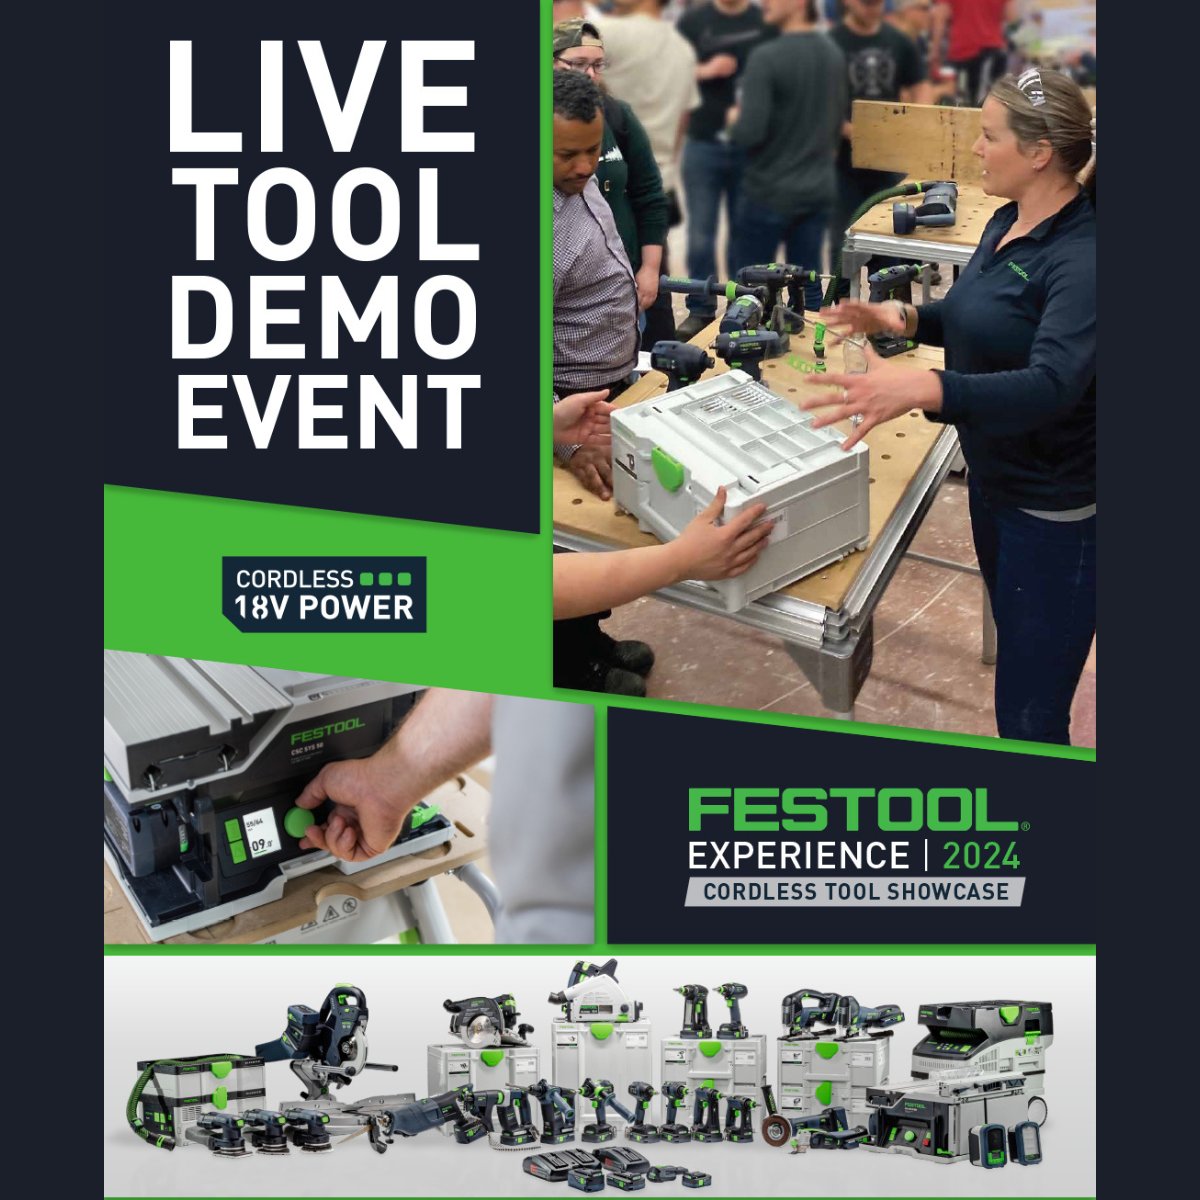 Head to Woodcraft San Antonio on Saturday, 4/5 for the Festool Experience featuring live demos of the latest Festool tools, plus one lucky attendee will take home a brand new Cordless Drill QUADRIVE! t.dostuffmedia.com/t/c/s/134829